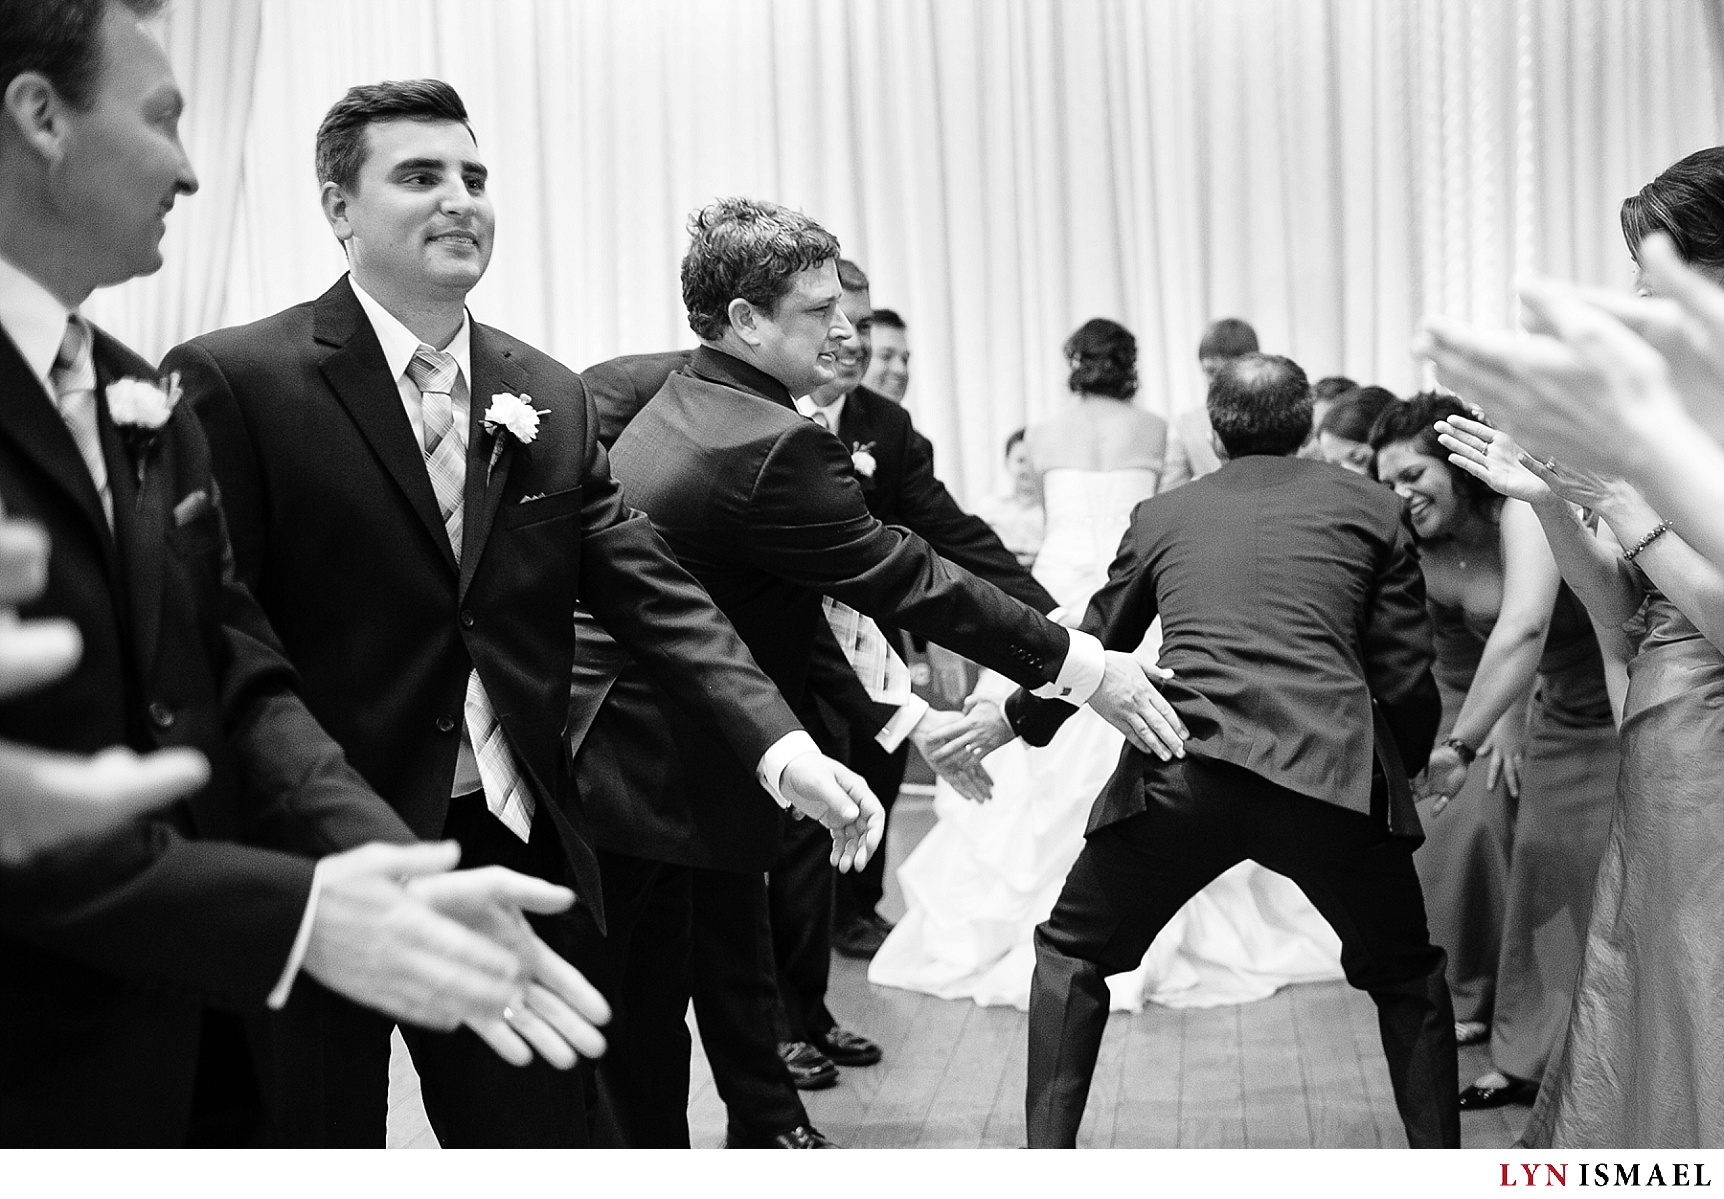 A funny moment at a wedding in Waterloo.